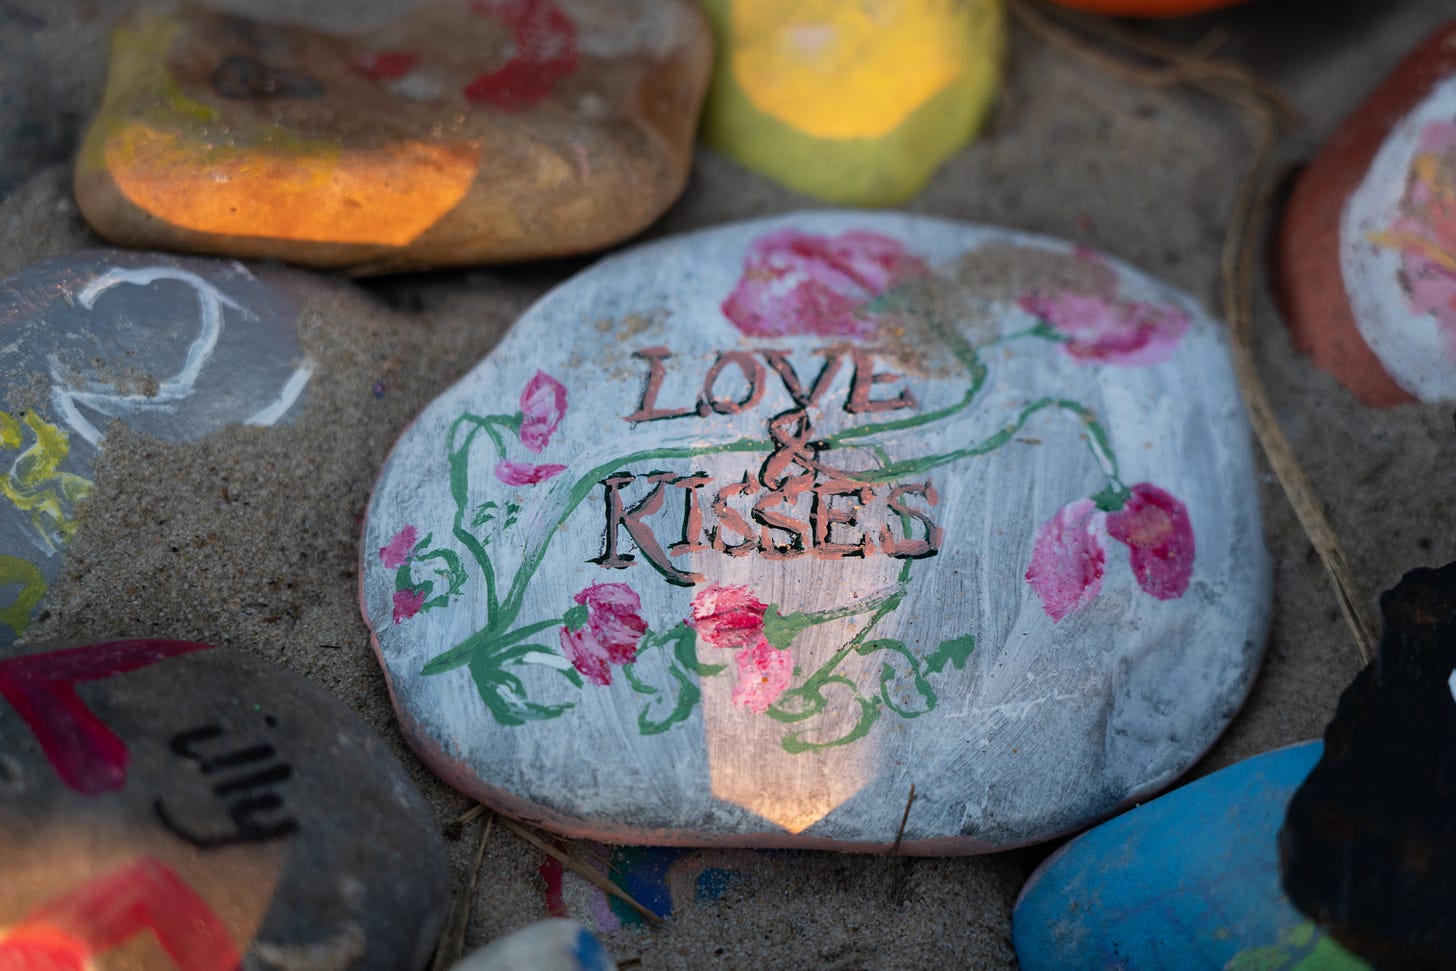 A painted rock with flowers and the words "Love & Kisses" image from Photo by <a href="https://unsplash.com/@jannerboy62?utm_source=unsplash&utm_medium=referral&utm_content=creditCopyText">Nick Fewings</a> on <a href="https://unsplash.com/images/things/kiss?utm_source=unsplash&utm_medium=referral&utm_content=creditCopyText">Unsplash</a>    Part of Driftwood & Grace by Melanie Williams 